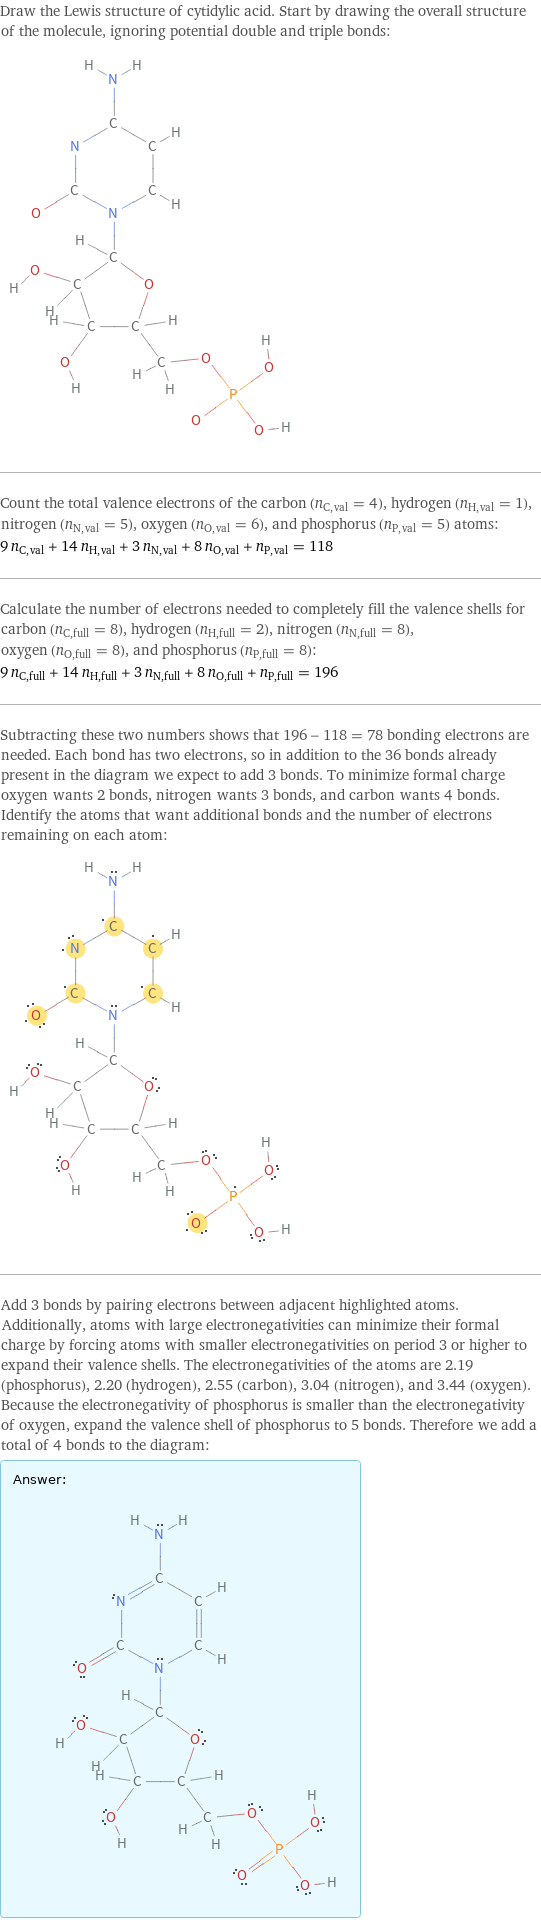 Draw the Lewis structure of cytidylic acid. Start by drawing the overall structure of the molecule, ignoring potential double and triple bonds:  Count the total valence electrons of the carbon (n_C, val = 4), hydrogen (n_H, val = 1), nitrogen (n_N, val = 5), oxygen (n_O, val = 6), and phosphorus (n_P, val = 5) atoms: 9 n_C, val + 14 n_H, val + 3 n_N, val + 8 n_O, val + n_P, val = 118 Calculate the number of electrons needed to completely fill the valence shells for carbon (n_C, full = 8), hydrogen (n_H, full = 2), nitrogen (n_N, full = 8), oxygen (n_O, full = 8), and phosphorus (n_P, full = 8): 9 n_C, full + 14 n_H, full + 3 n_N, full + 8 n_O, full + n_P, full = 196 Subtracting these two numbers shows that 196 - 118 = 78 bonding electrons are needed. Each bond has two electrons, so in addition to the 36 bonds already present in the diagram we expect to add 3 bonds. To minimize formal charge oxygen wants 2 bonds, nitrogen wants 3 bonds, and carbon wants 4 bonds. Identify the atoms that want additional bonds and the number of electrons remaining on each atom:  Add 3 bonds by pairing electrons between adjacent highlighted atoms. Additionally, atoms with large electronegativities can minimize their formal charge by forcing atoms with smaller electronegativities on period 3 or higher to expand their valence shells. The electronegativities of the atoms are 2.19 (phosphorus), 2.20 (hydrogen), 2.55 (carbon), 3.04 (nitrogen), and 3.44 (oxygen). Because the electronegativity of phosphorus is smaller than the electronegativity of oxygen, expand the valence shell of phosphorus to 5 bonds. Therefore we add a total of 4 bonds to the diagram: Answer: |   | 